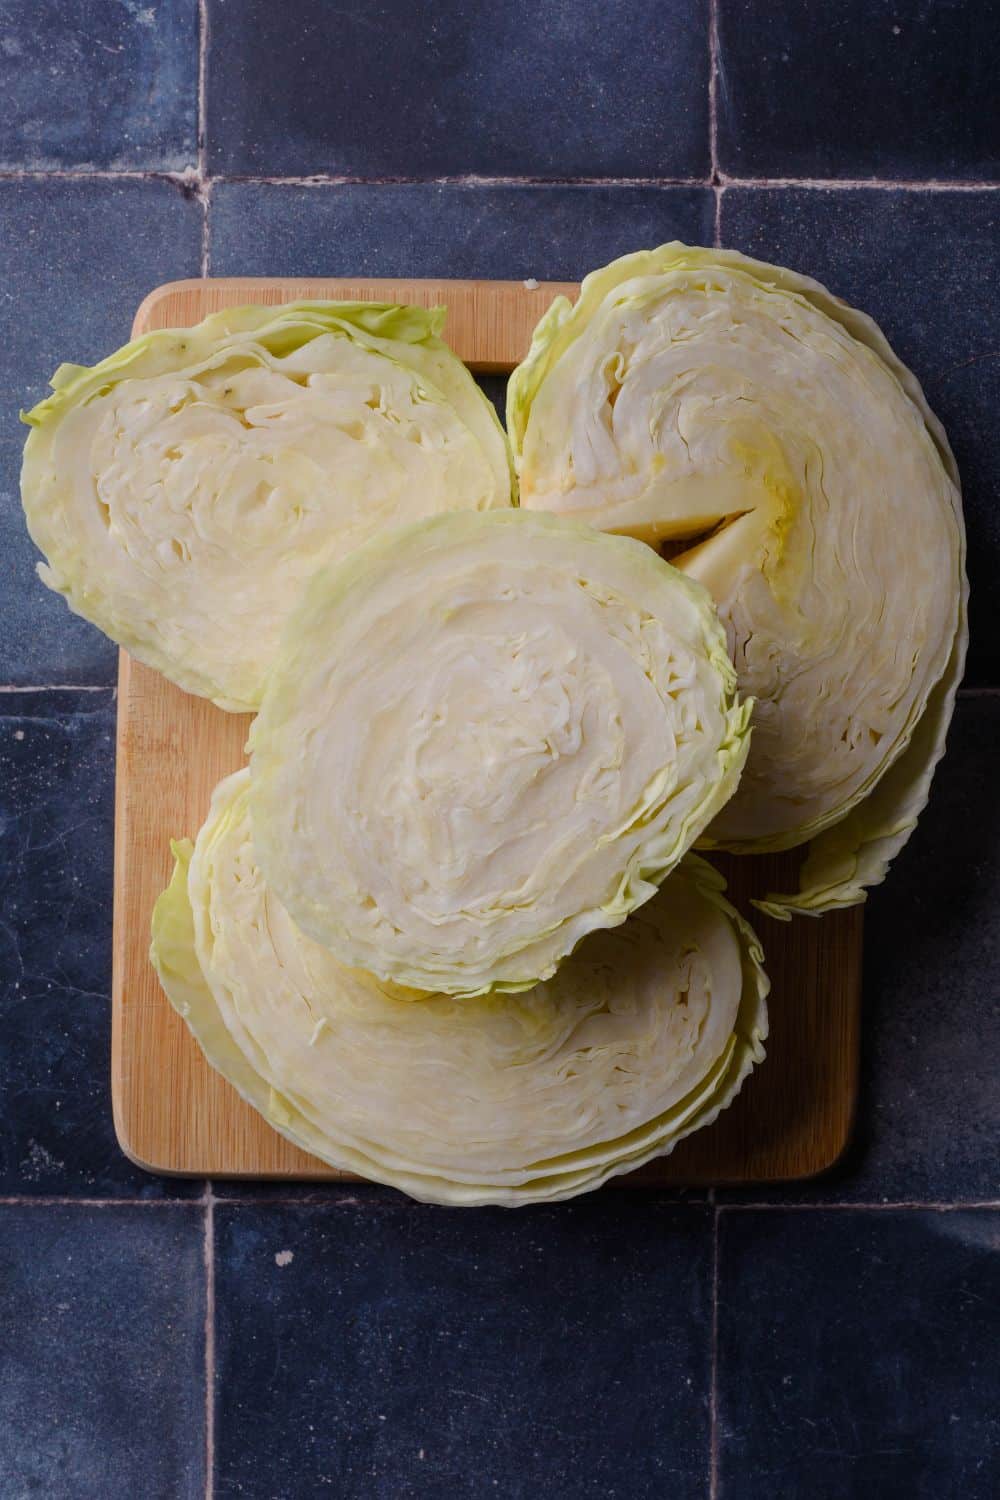 Uncooked cabbage sliced into four steaks on a wooden cutting board.